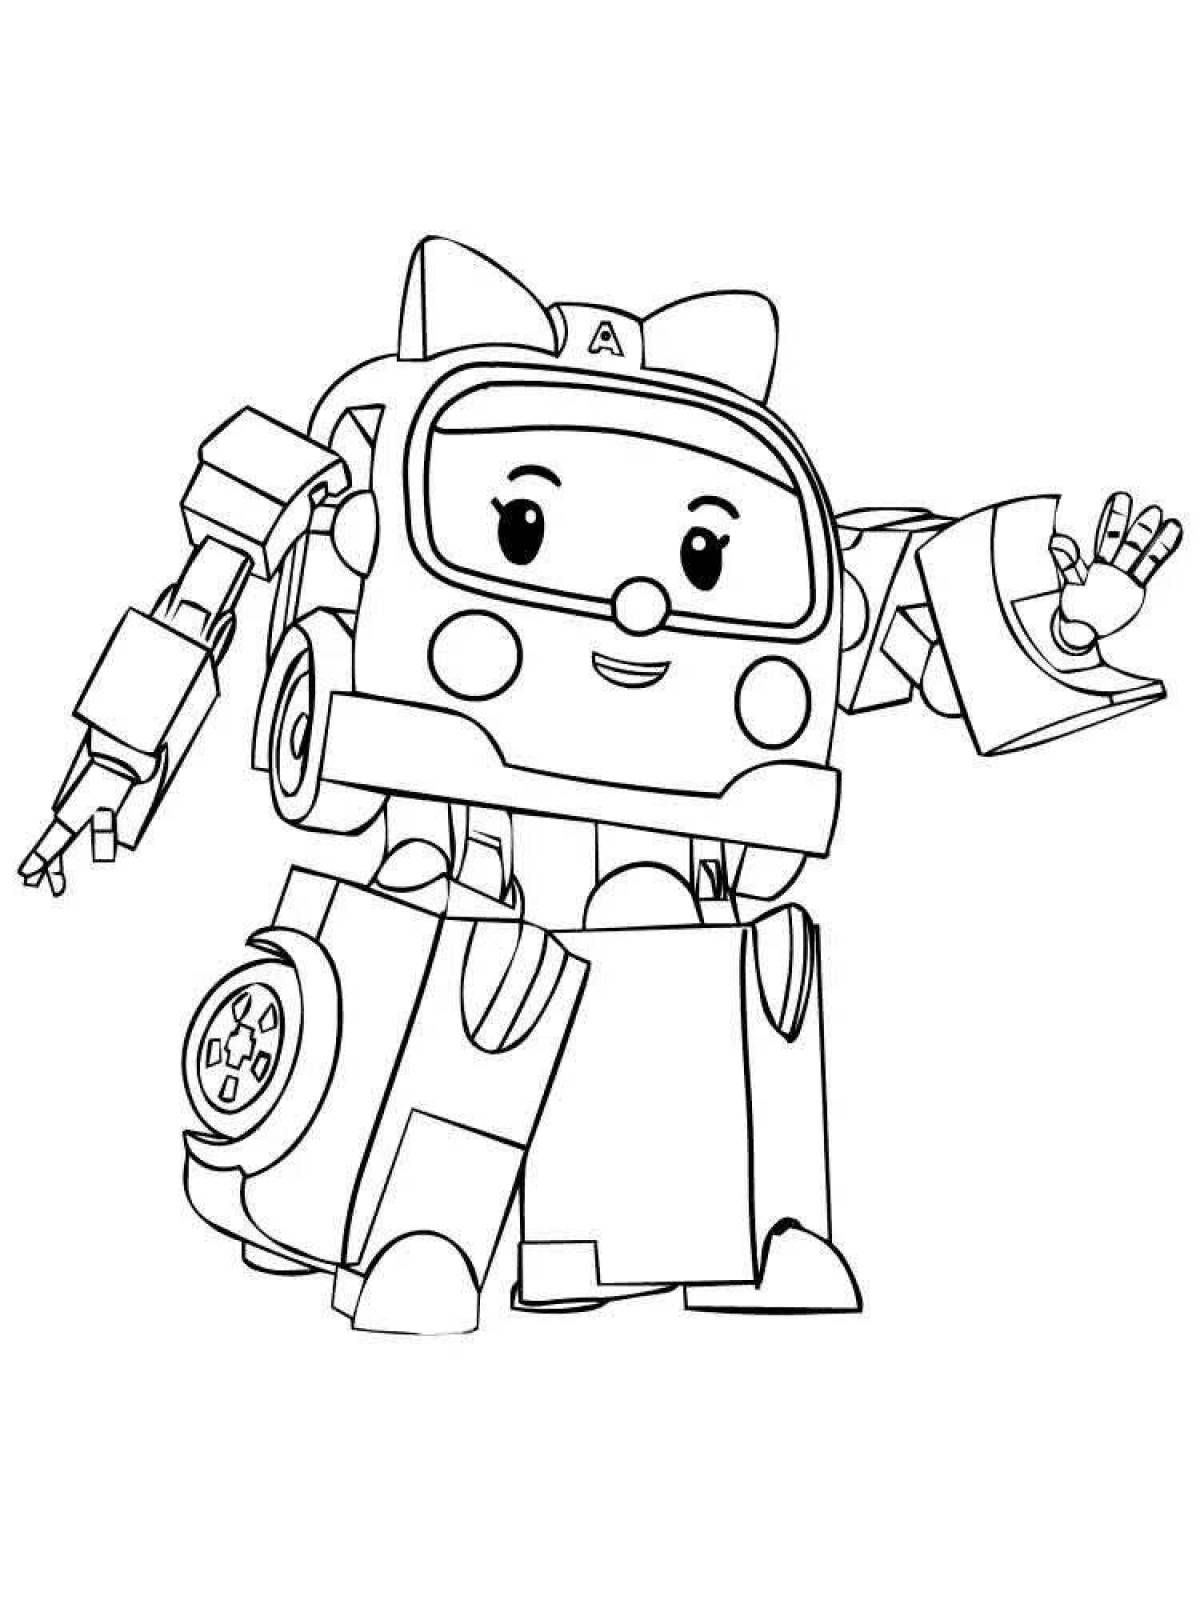 Animated helly coloring book